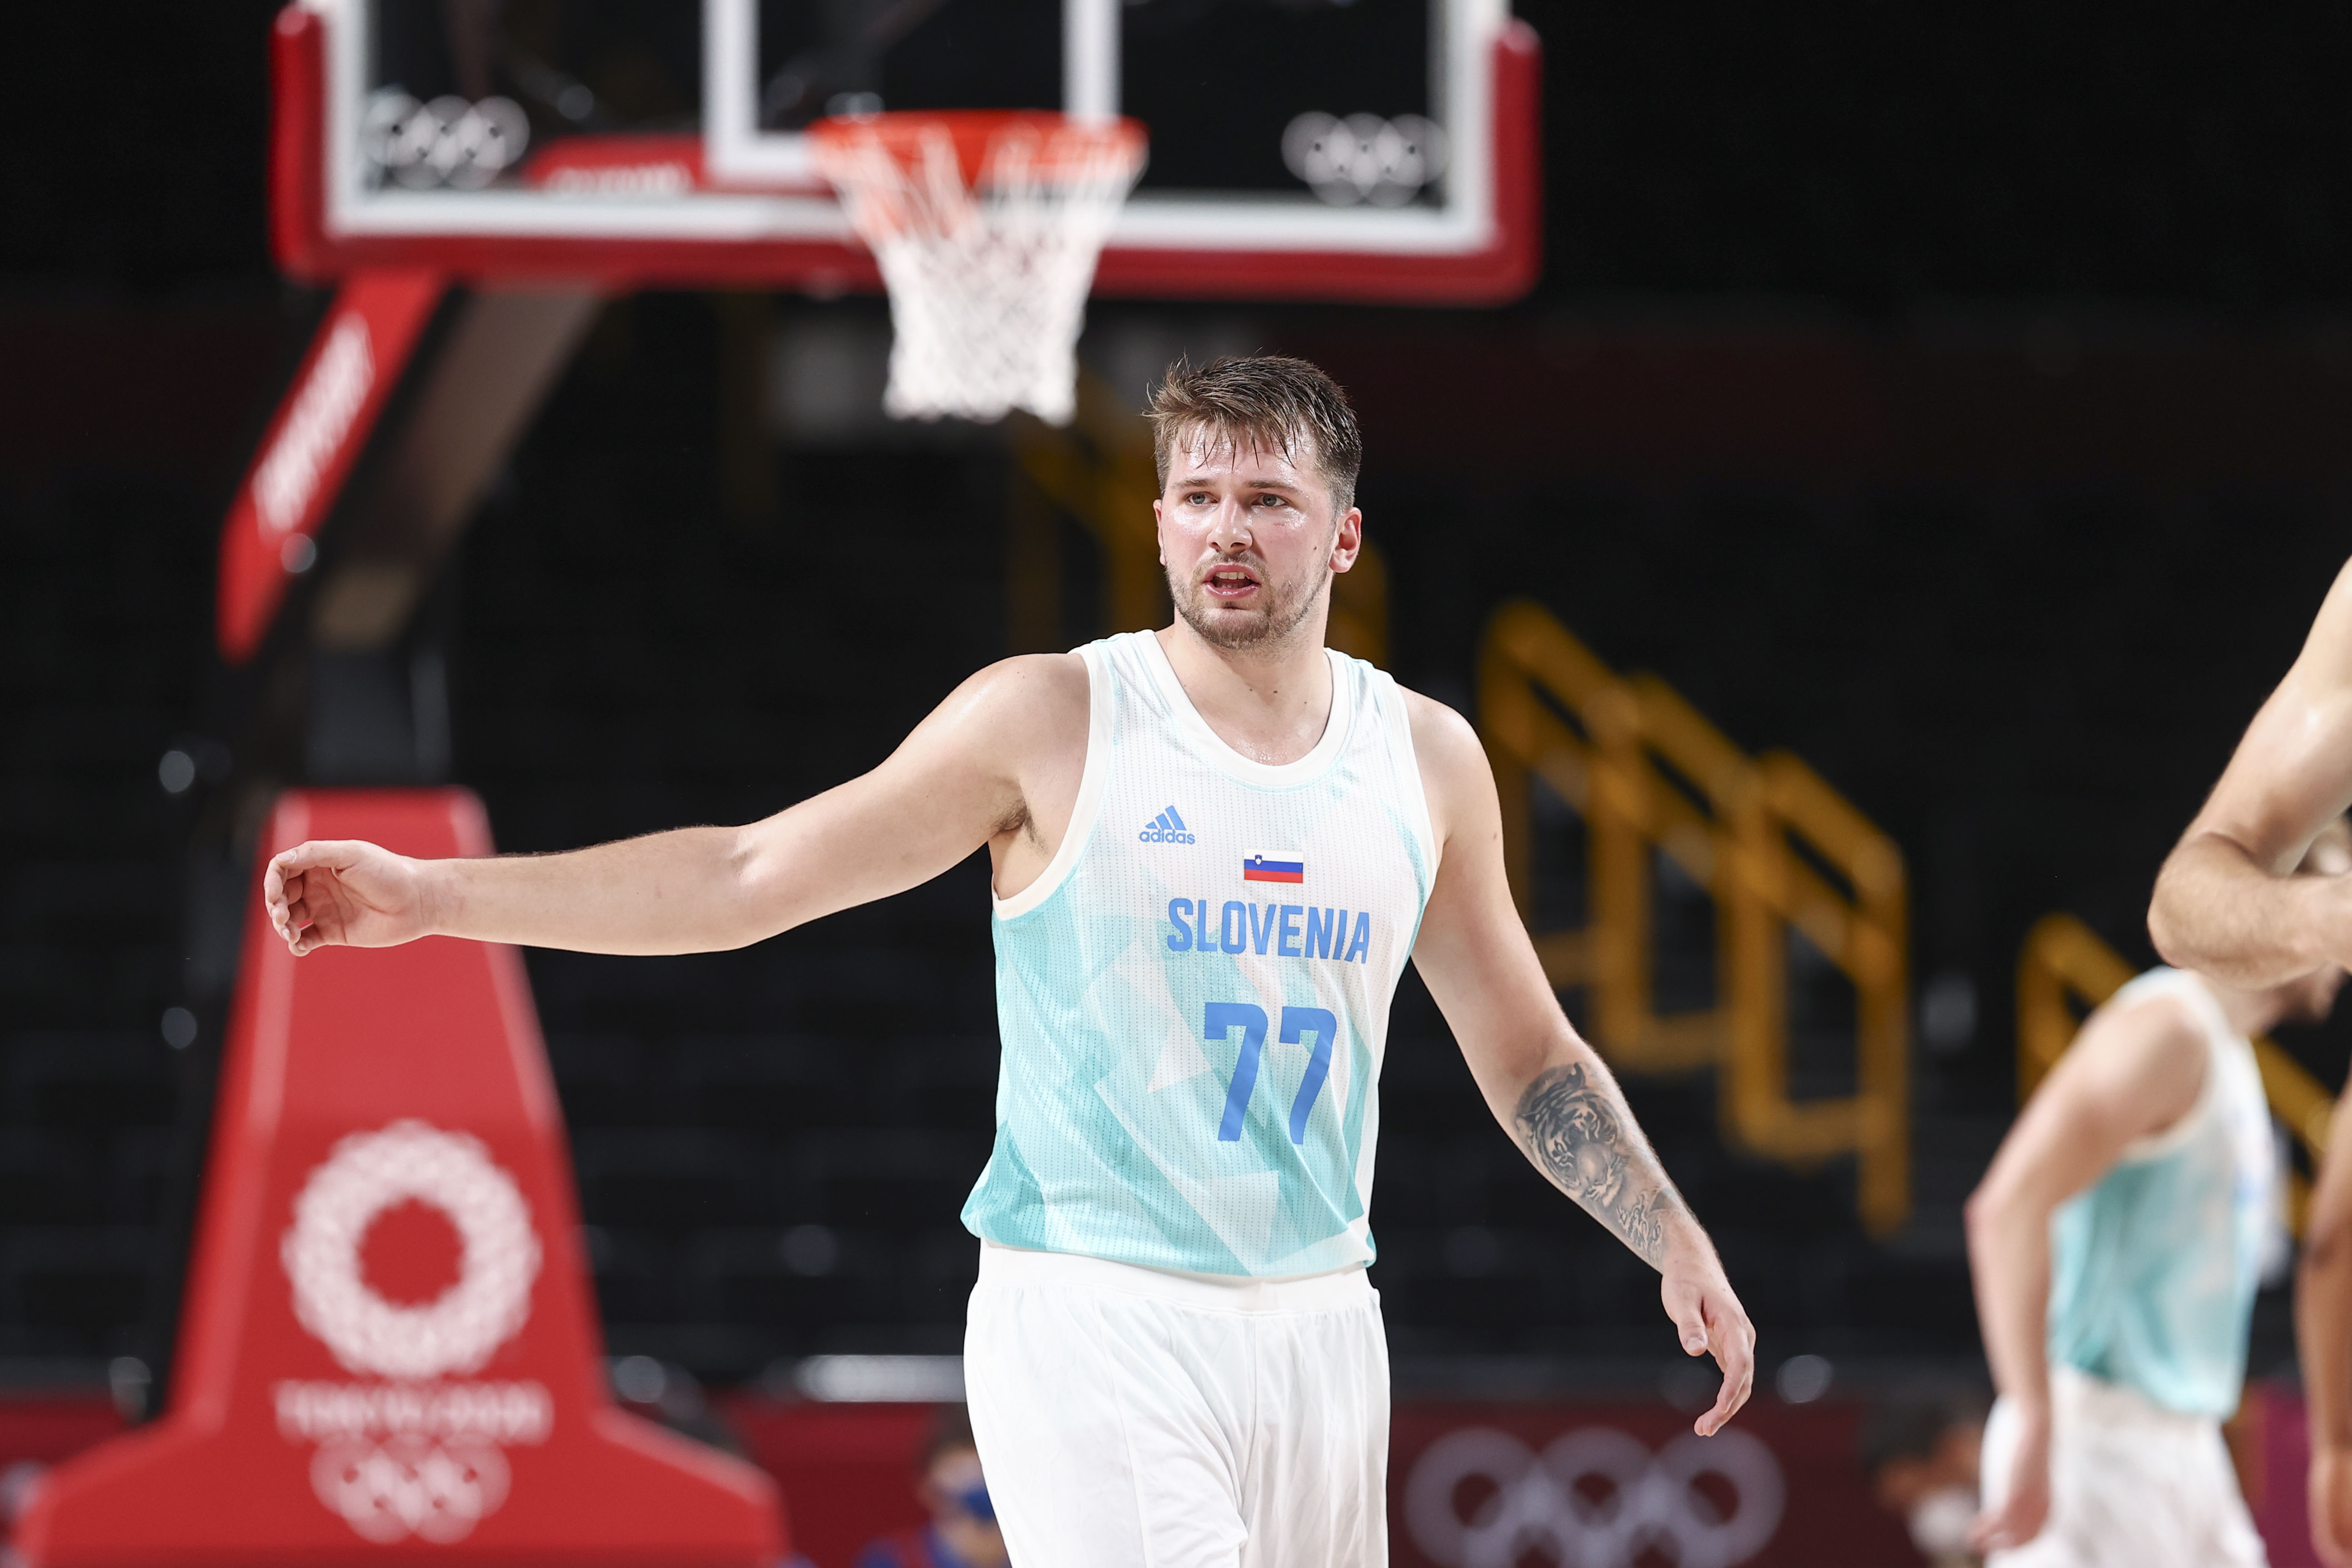 Dallas Mavs' Luka Doncic Leads Slovenia To First Olympics